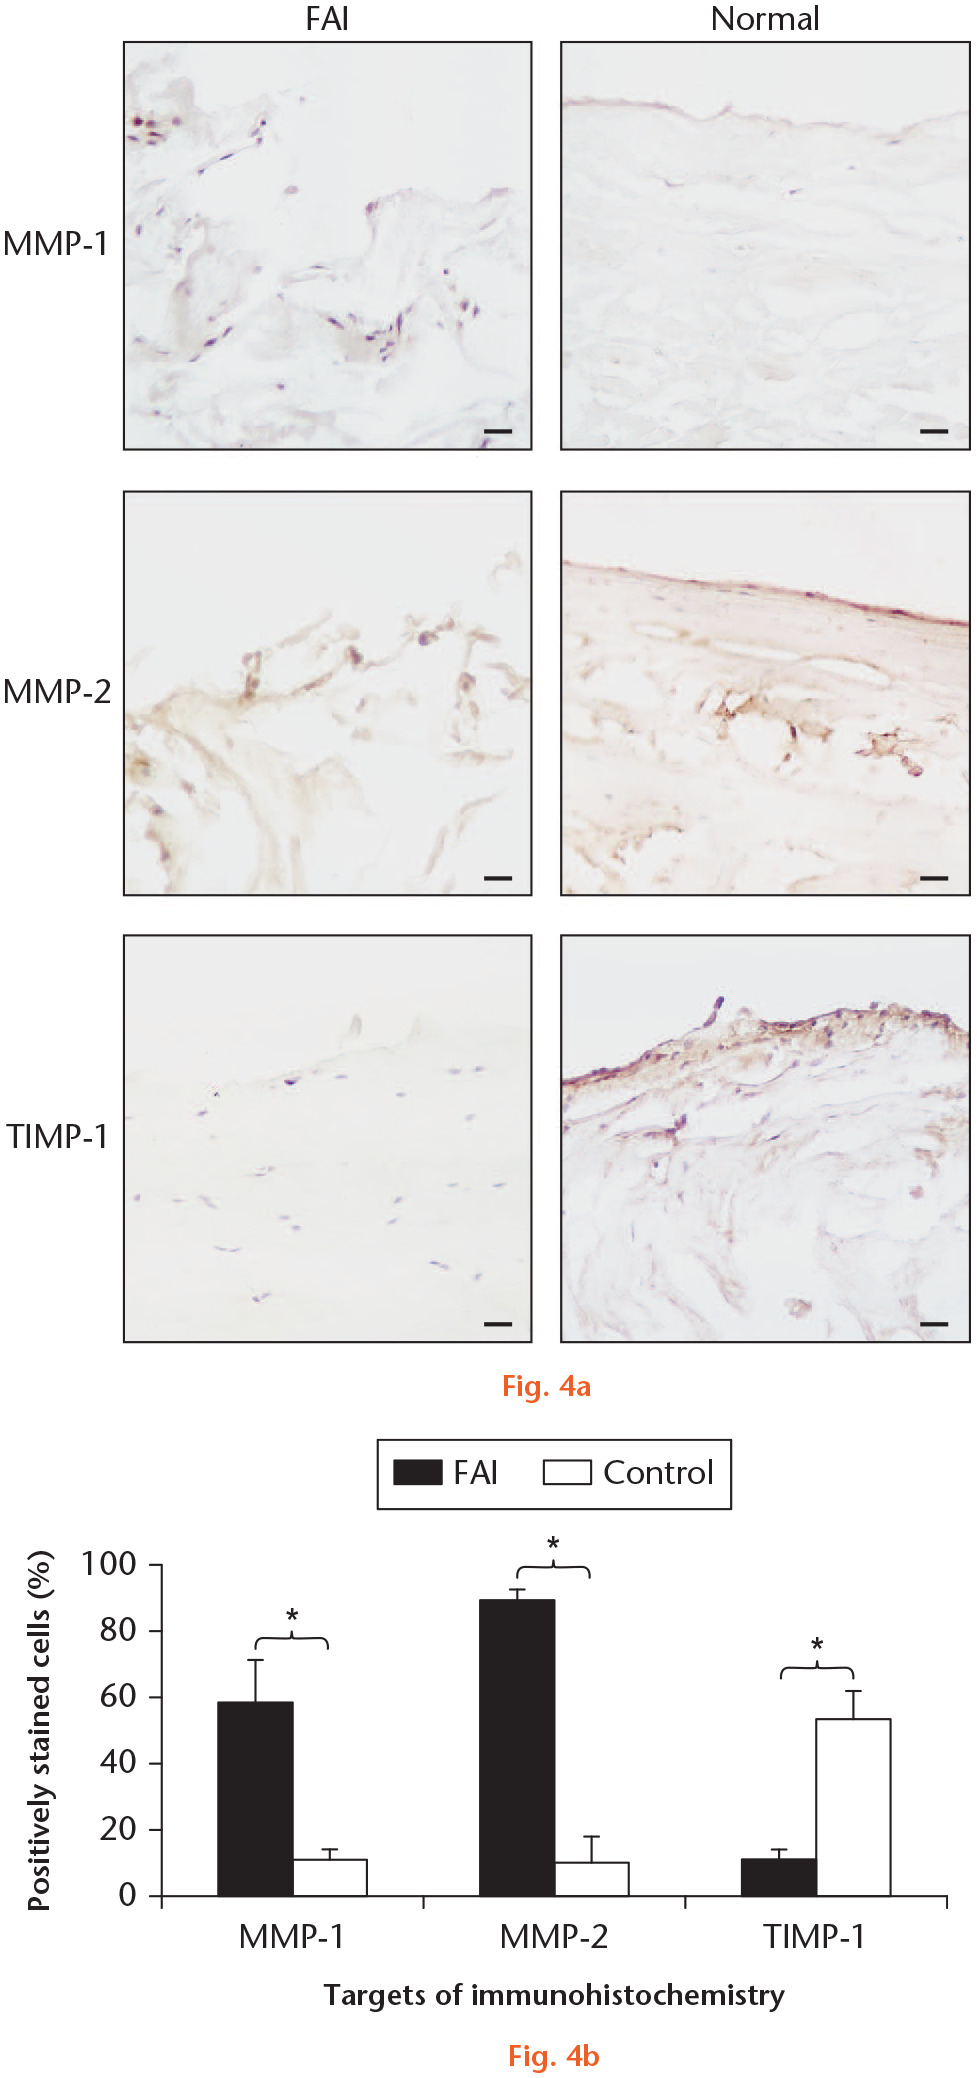 Fig. 4 
            a) Immunohistochemistry of matrix metalloproteinase (MMP)-1, MMP-2, and tissue inhibitor of metalloproteinases (TIMP)-1 in the superficial region of the normal and femoroacetabular impingement (FAI) labrums. MMP-1 positive cells are detected mostly in the superficial layer of the FAI labrum but not in the normal labrum. MMP-2 is detected both intracellularly and extracellularly in the superficial region in the FAI labrum. TIMP-1 is extensively stained in the normal labrum but not in the FAI labrum. b) The percentages of MMP-1 and MMP-2 positive cells in the superficial region of the FAI labrum are significantly increased, compared with the normal labrum. The percentage of TIMP-1 positive cells in the superficial region of the FAI labrum, however, is reduced. Bars represent 50 µm (original magnification 200×). Nuclei are counter-stained with haematoxylin. *p < 0.05.
          